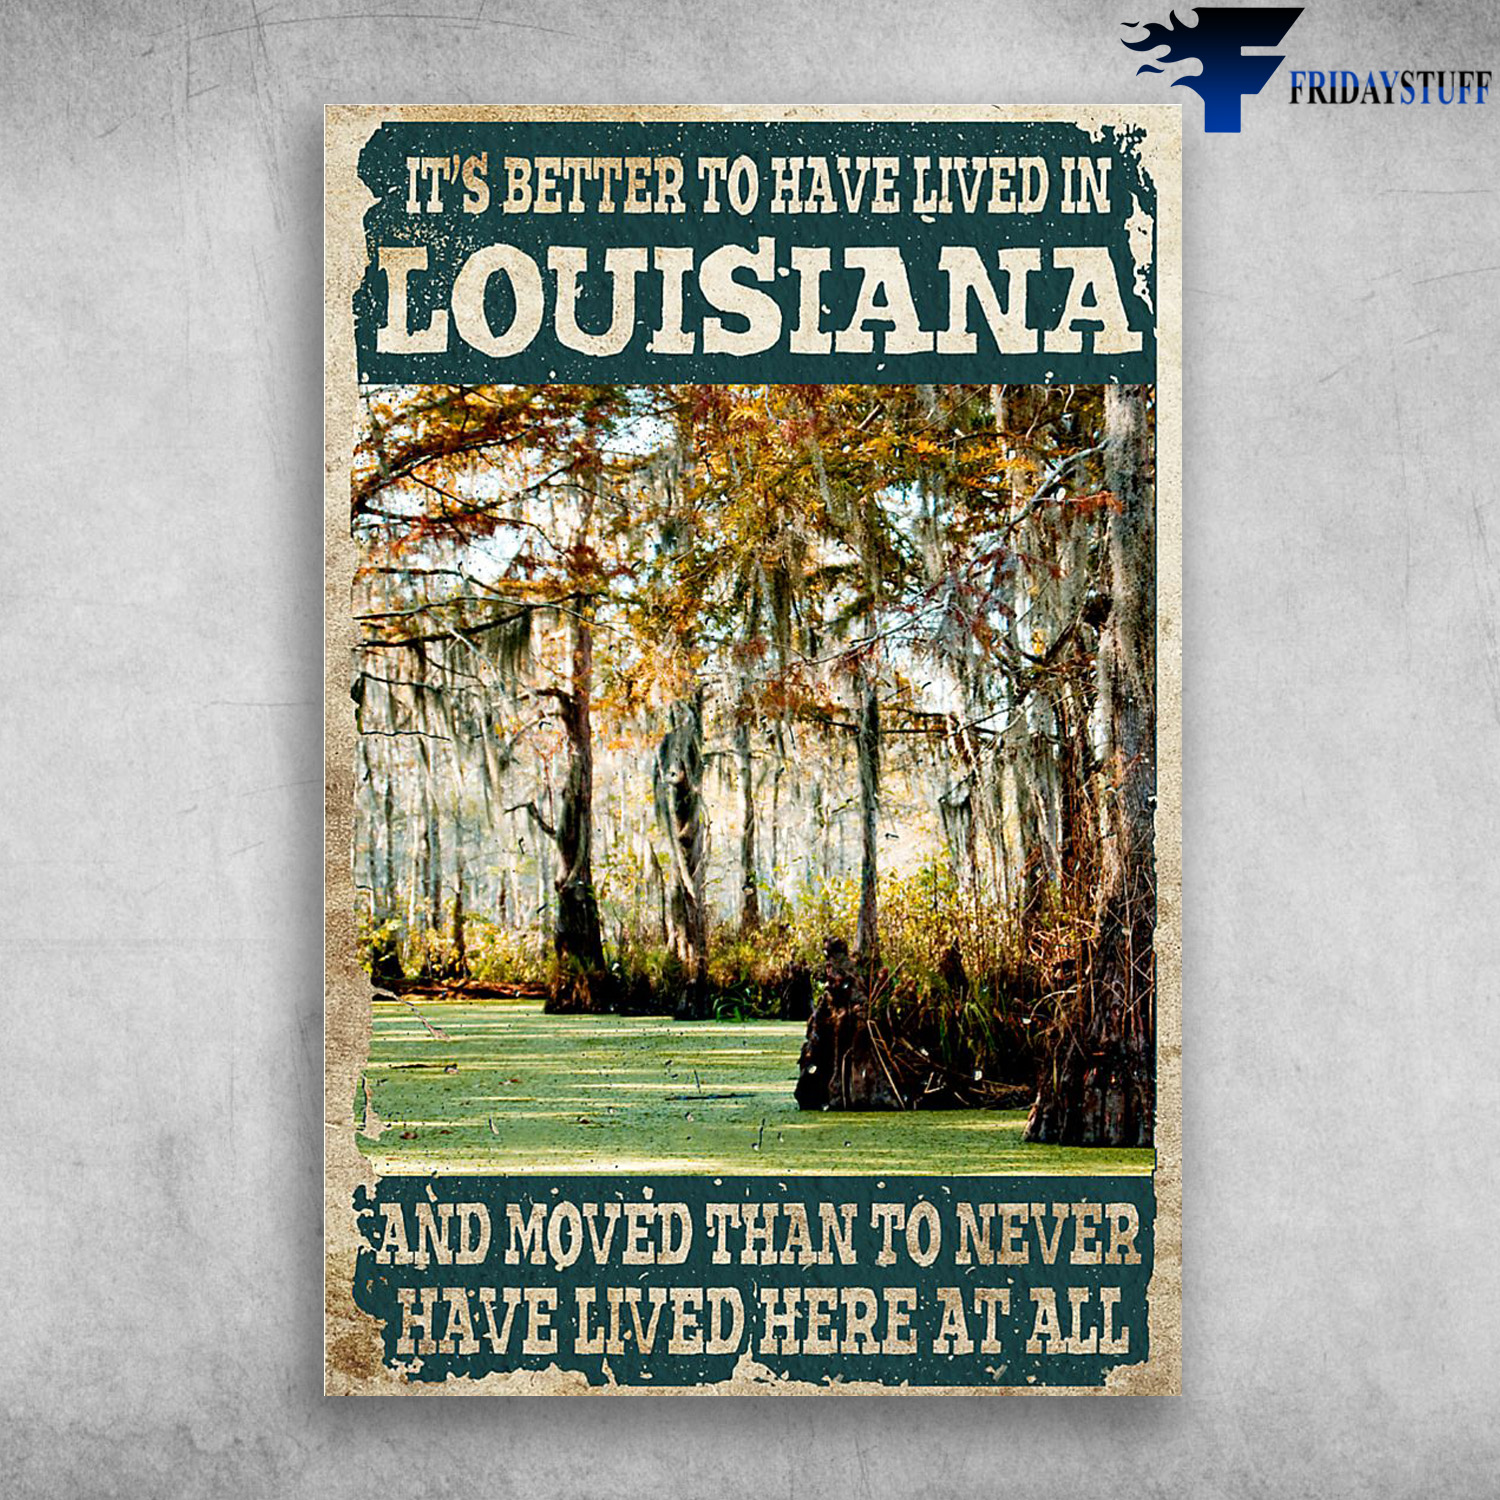 Louisiana It's Better To Have Live In Louisiana, And Moved Than To Never Have Lived Here At All